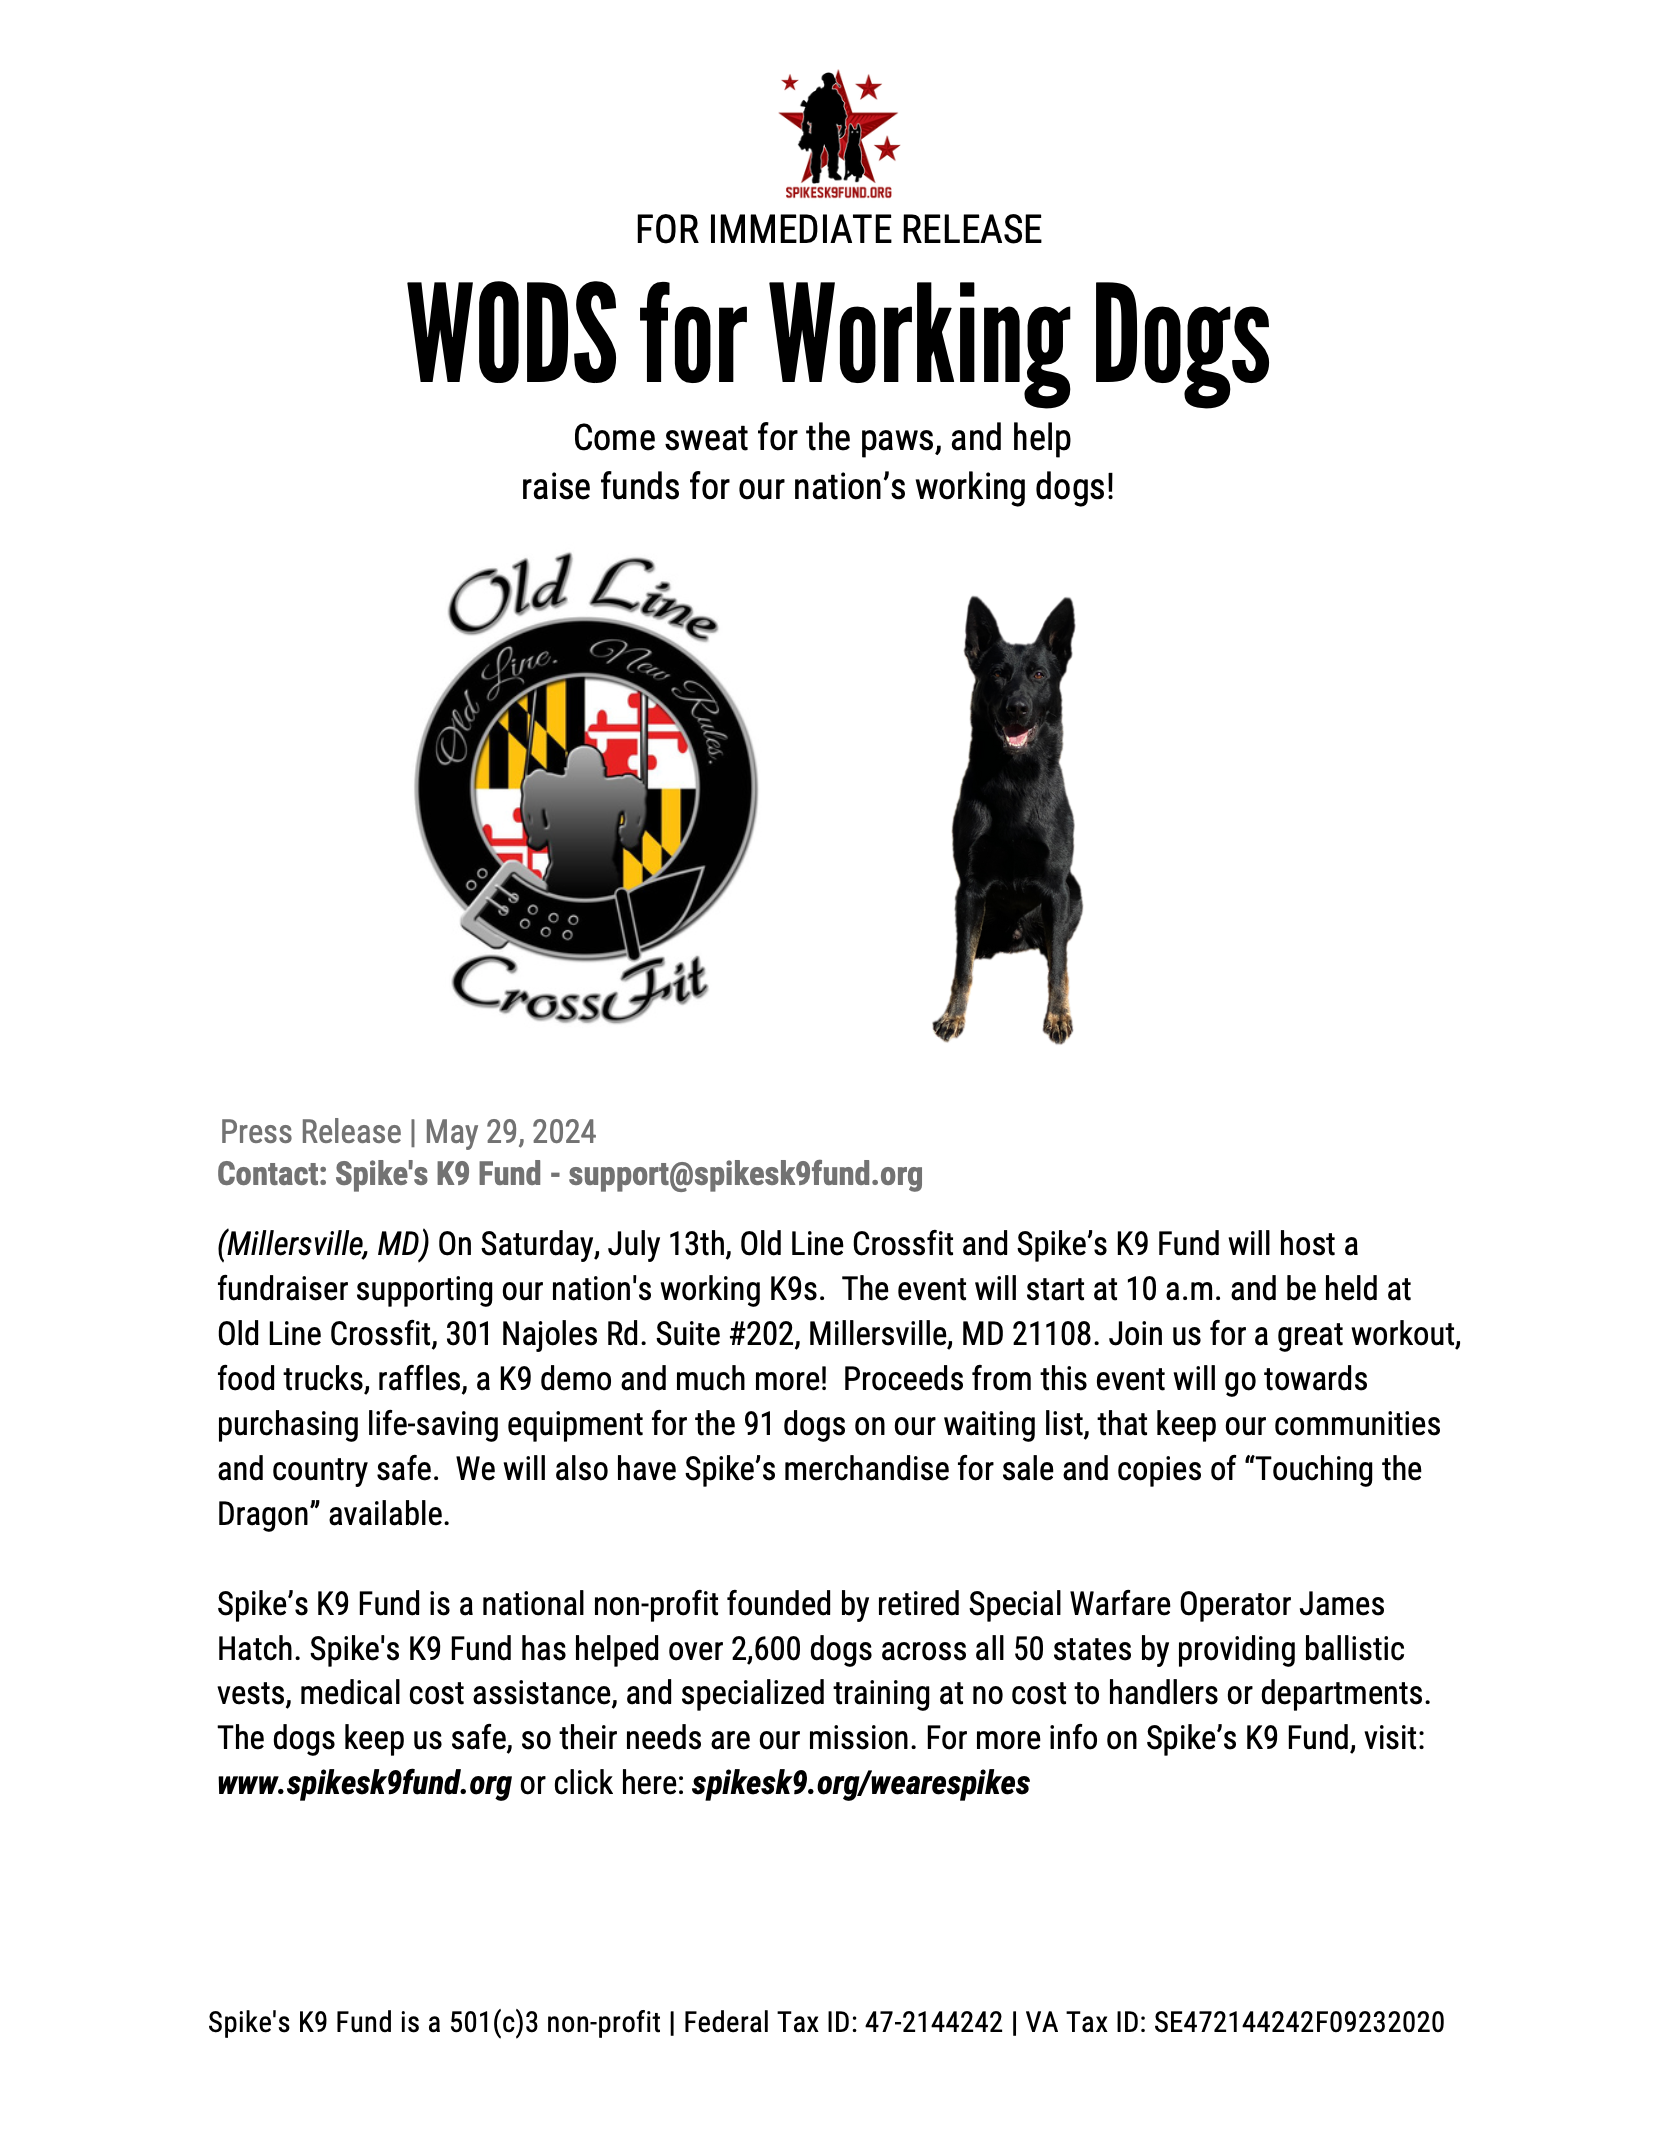 WODS for Working Dogs